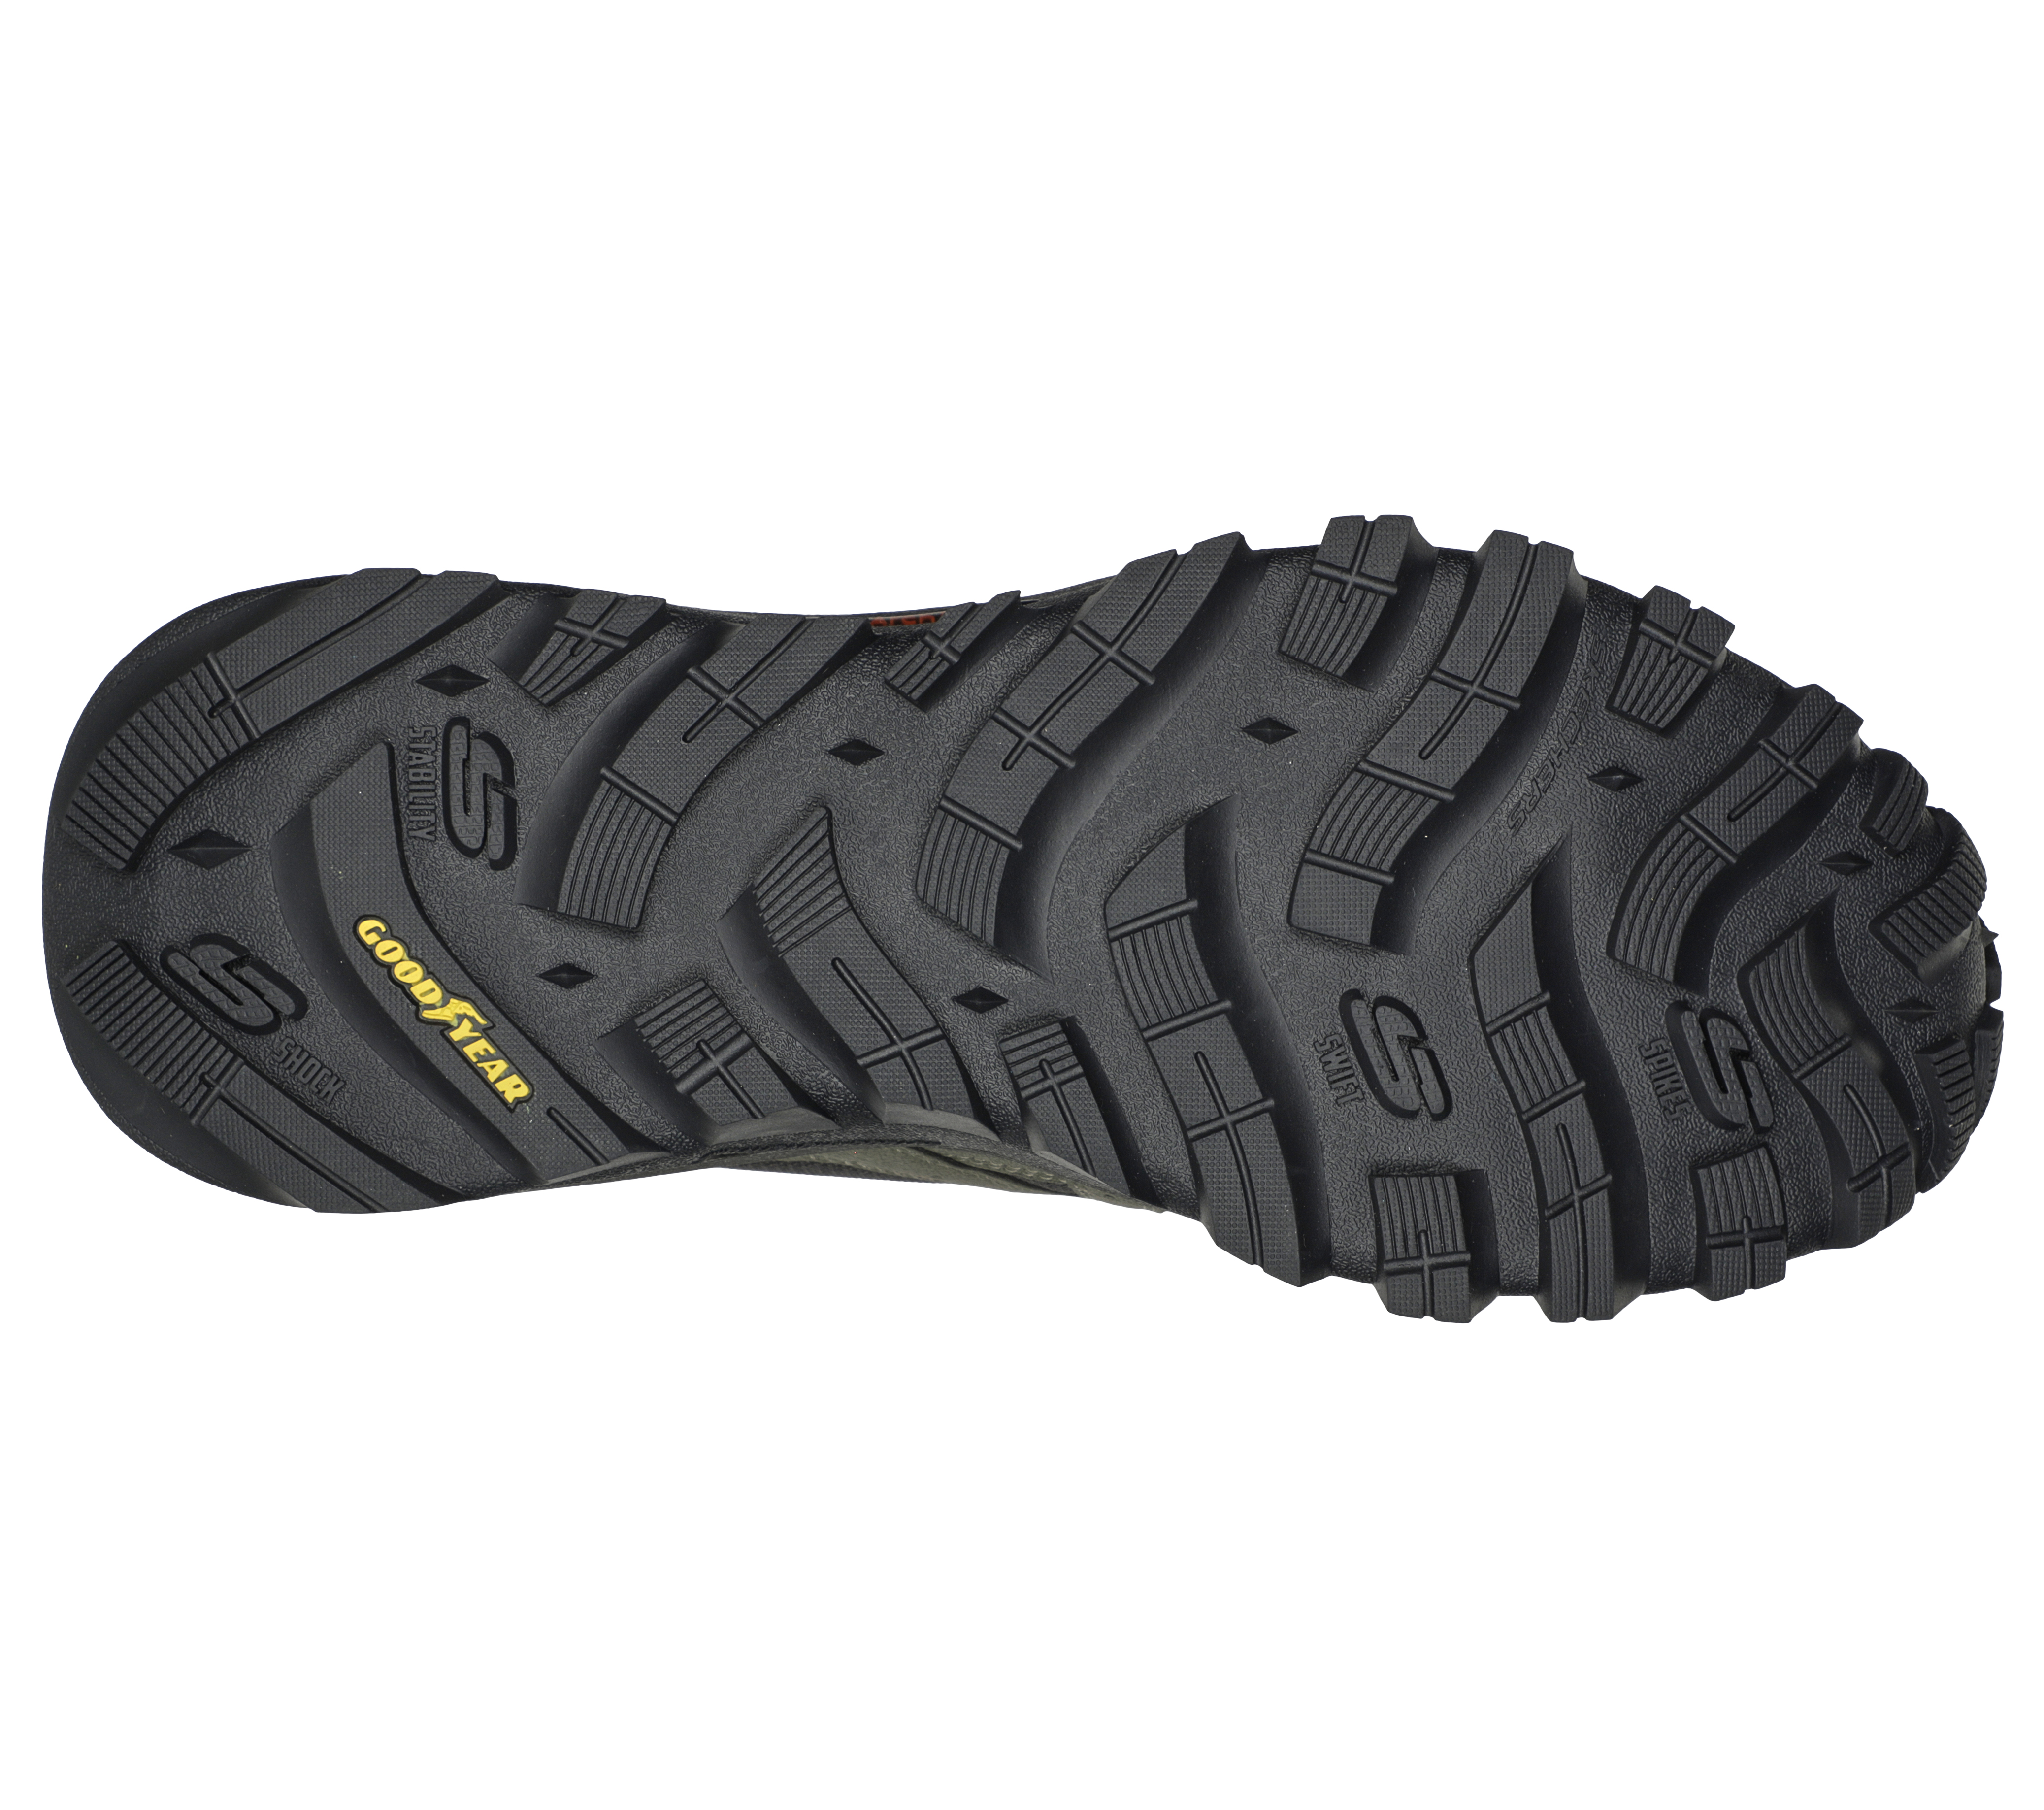 SKECHERS Arch Fit Trail Air